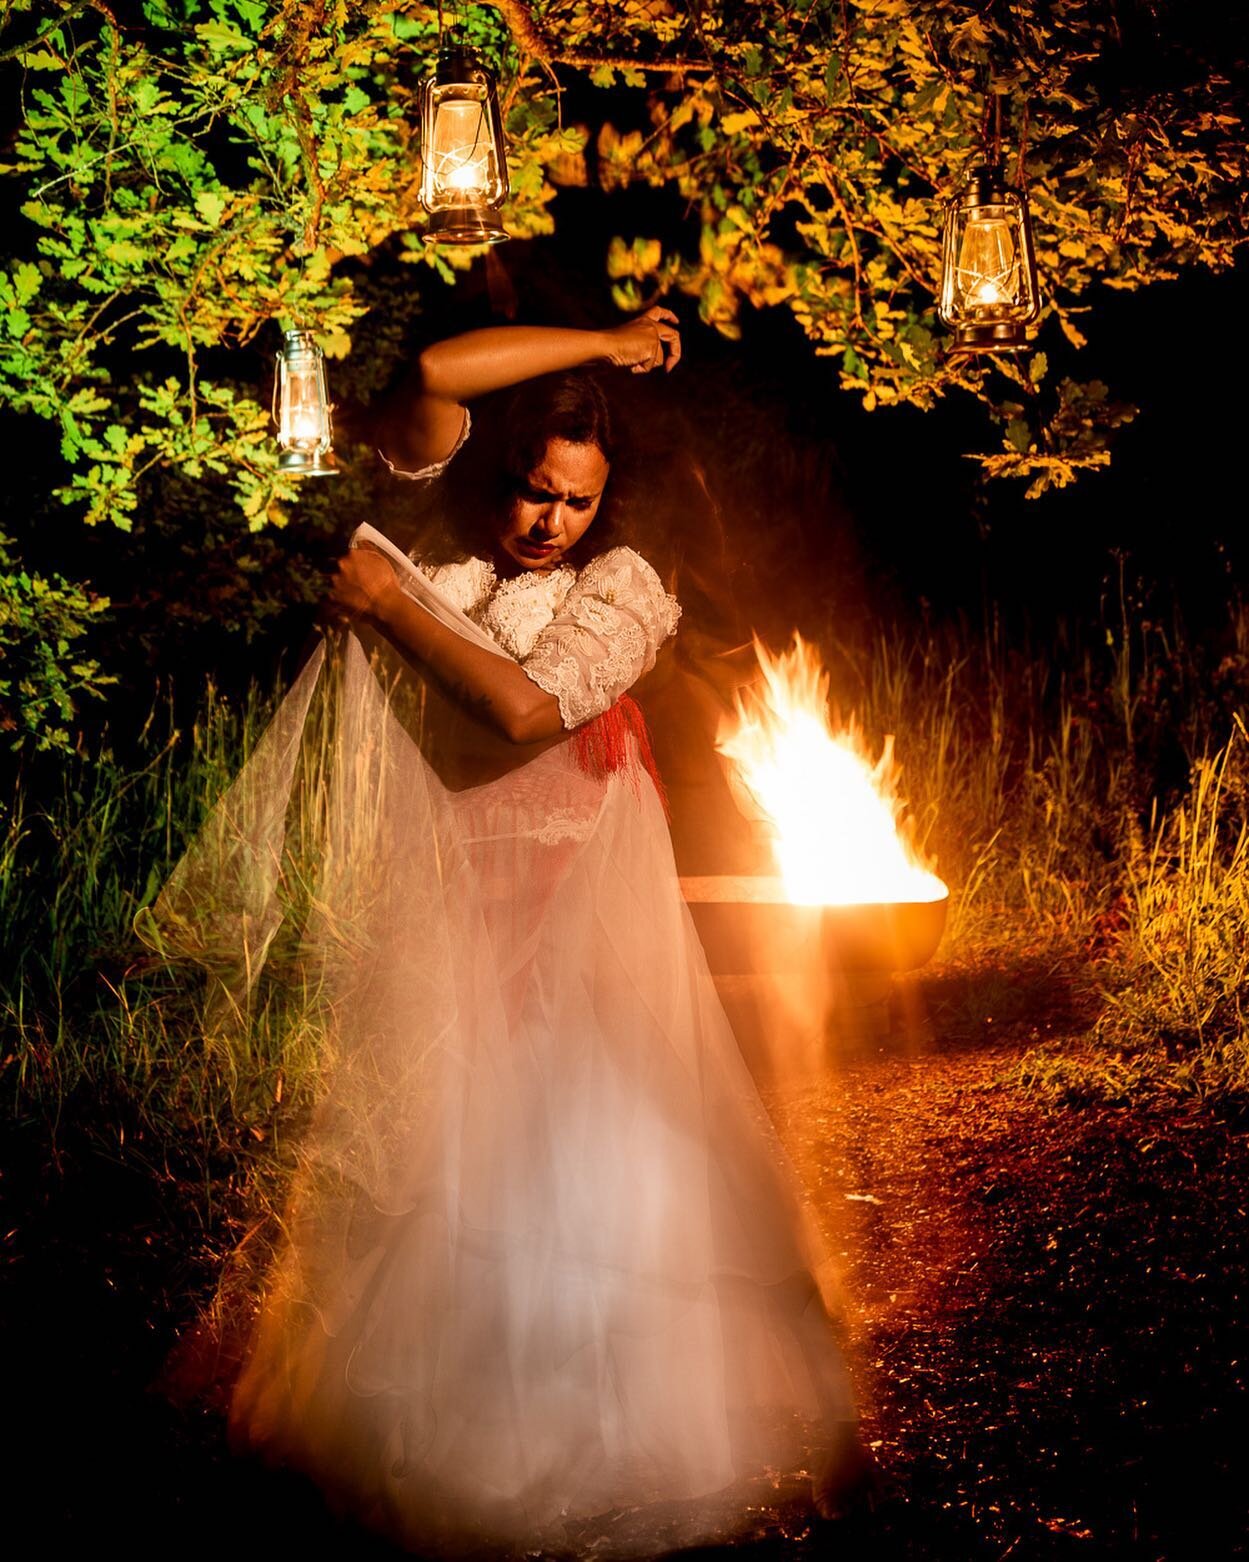 Constellations. This is  Ch&eacute; @che_adams_16 flamenco dancer. She&rsquo;s performing in the forest in the strange, beautiful experience that is Constellations. Check it out between now and 19 November at Spier @spierwinefarm Again thanks to dire